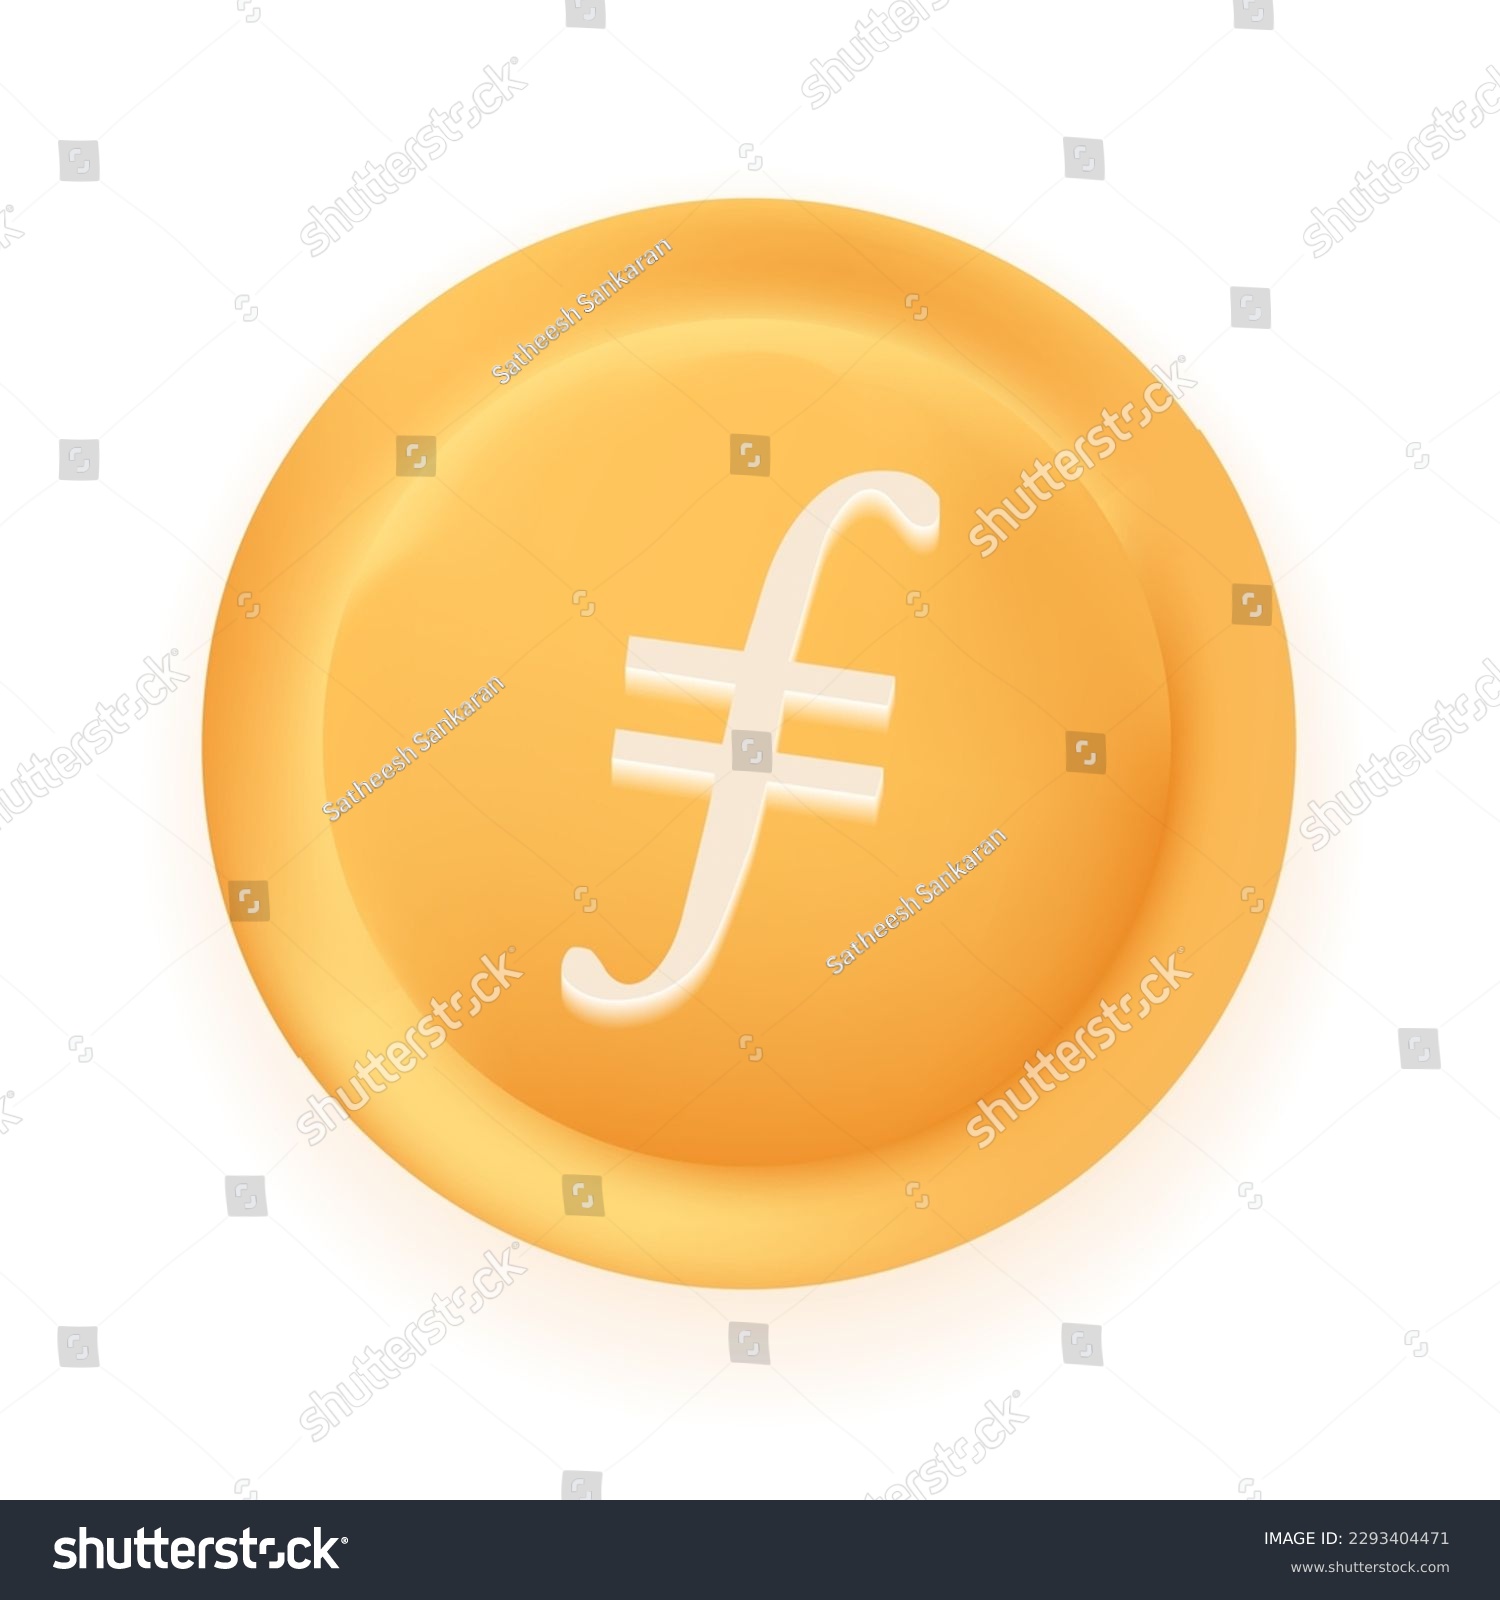 SVG of Filecoin (FIL) crypto currency 3D coin vector illustration isolated on white background. Can be used as virtual money icon, logo, emblem, sticker and badge designs. svg